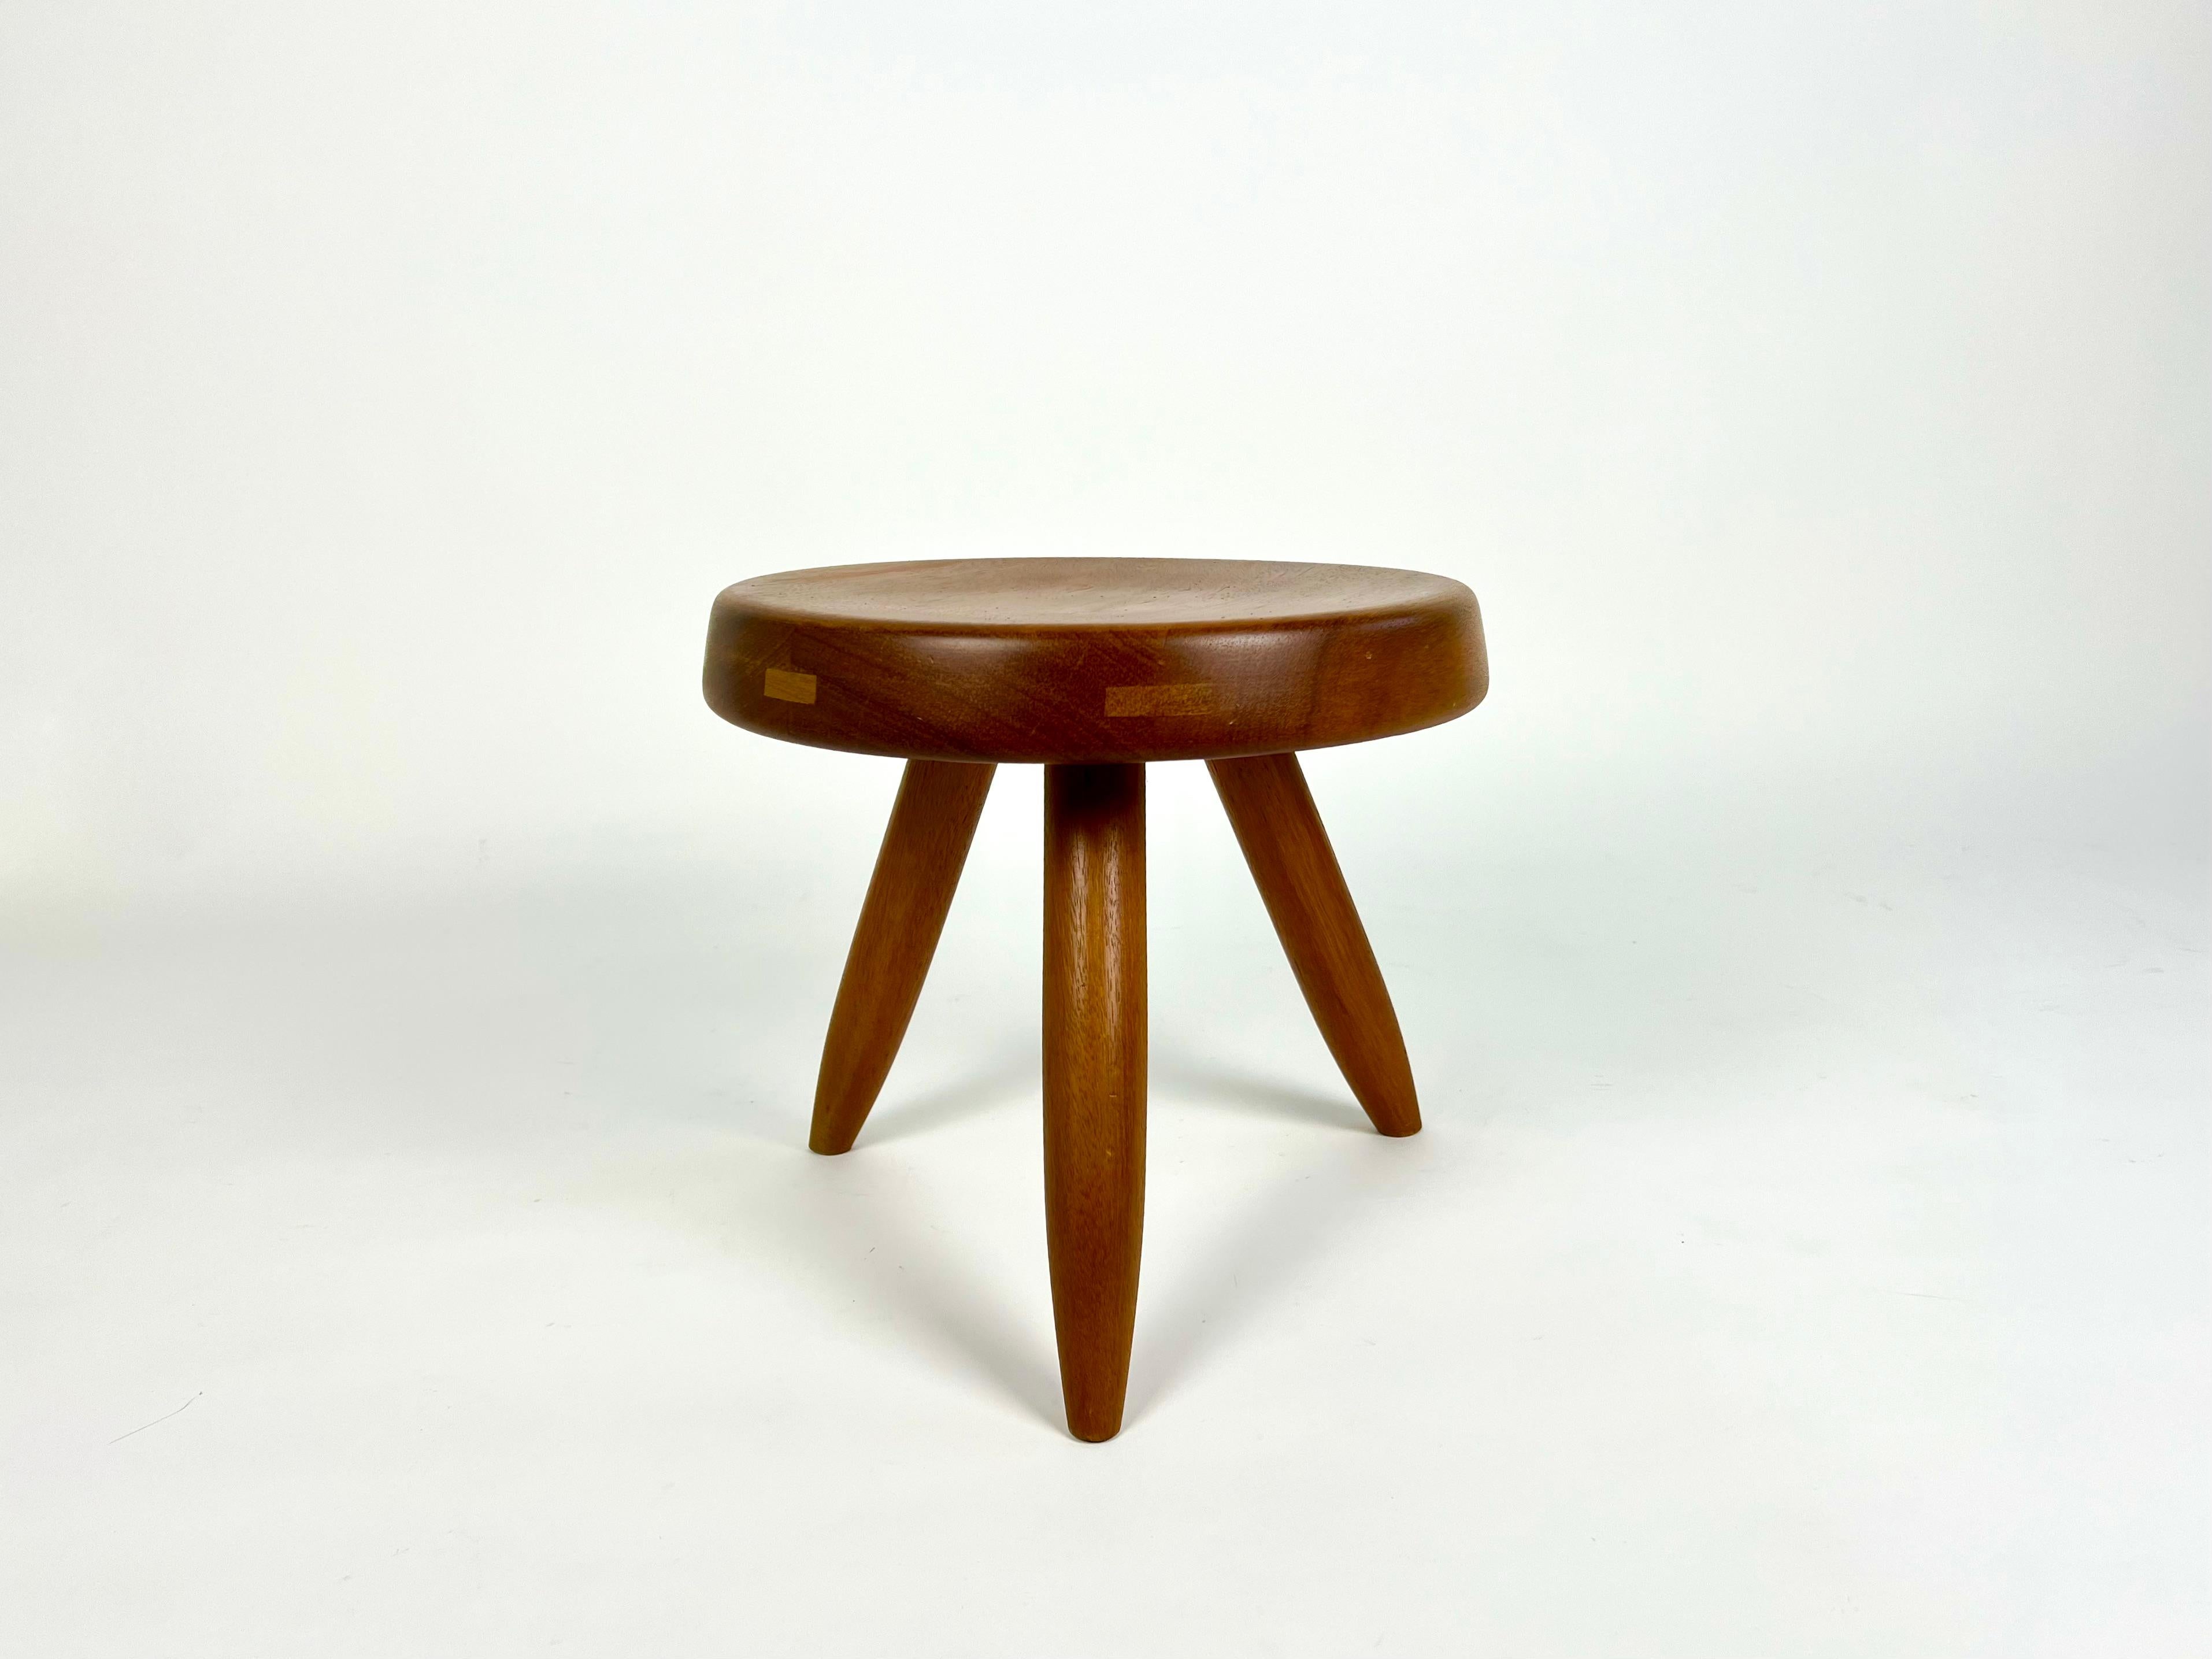 Berger low stool in mahogany, Charlotte Perriand 2